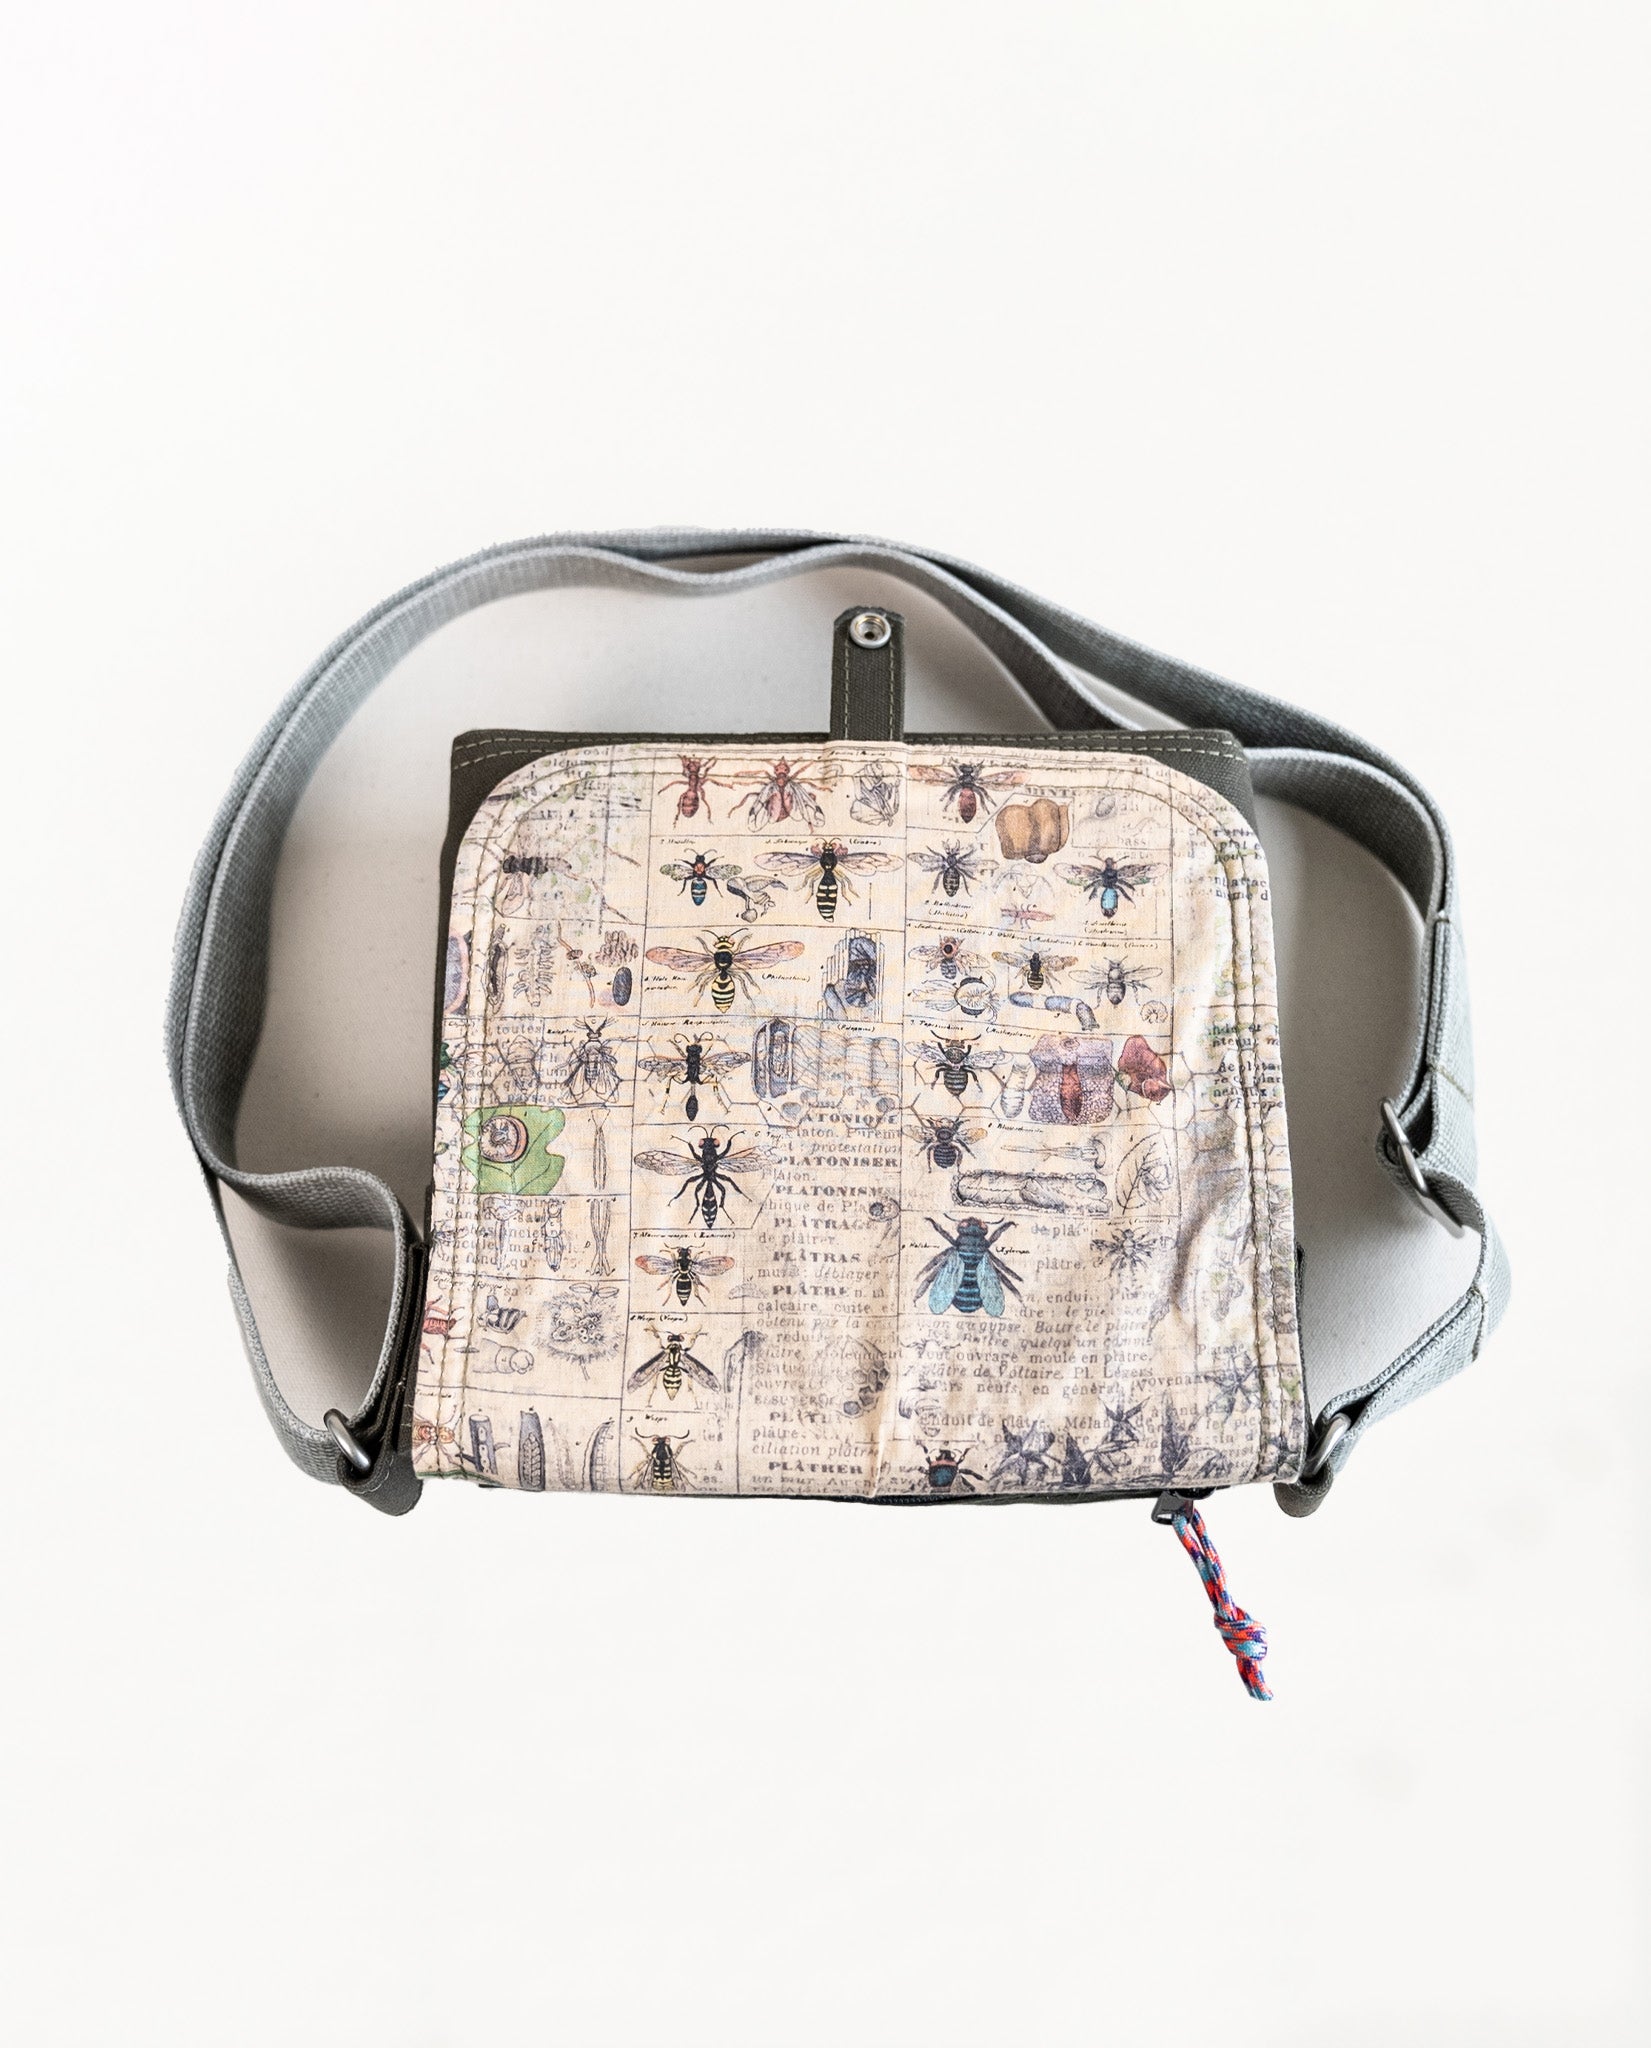 Inside of flap showing entomology print lining fabric of Dock 5’s Hummingbird Canvas Mini Messenger Bag in olive featuring art from owner Natalija Walbridge